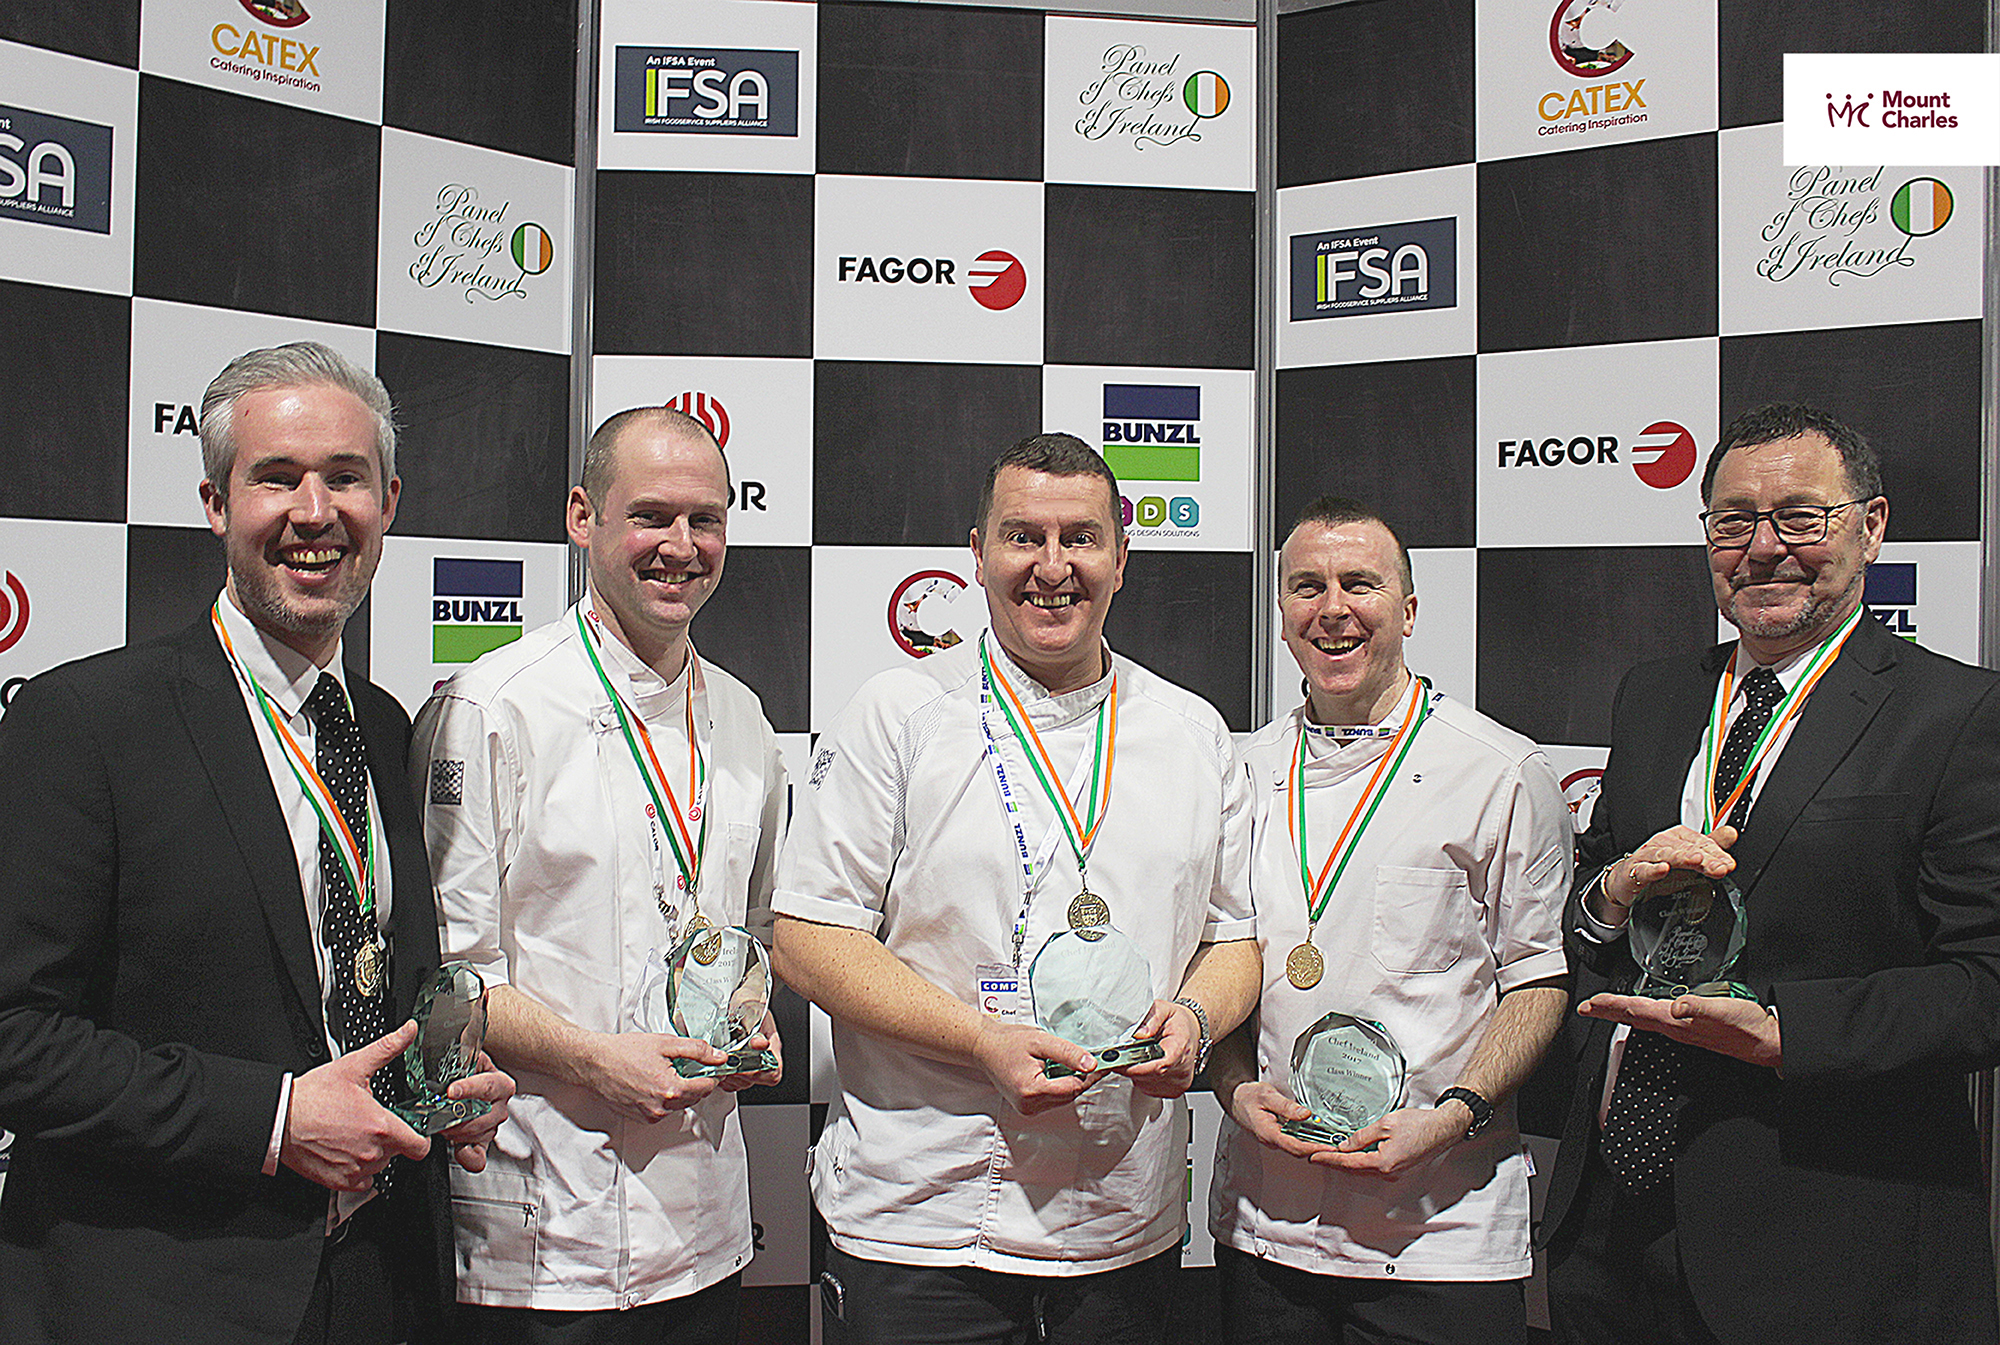 Mount Charles team serves up gold at Chef Ireland competition